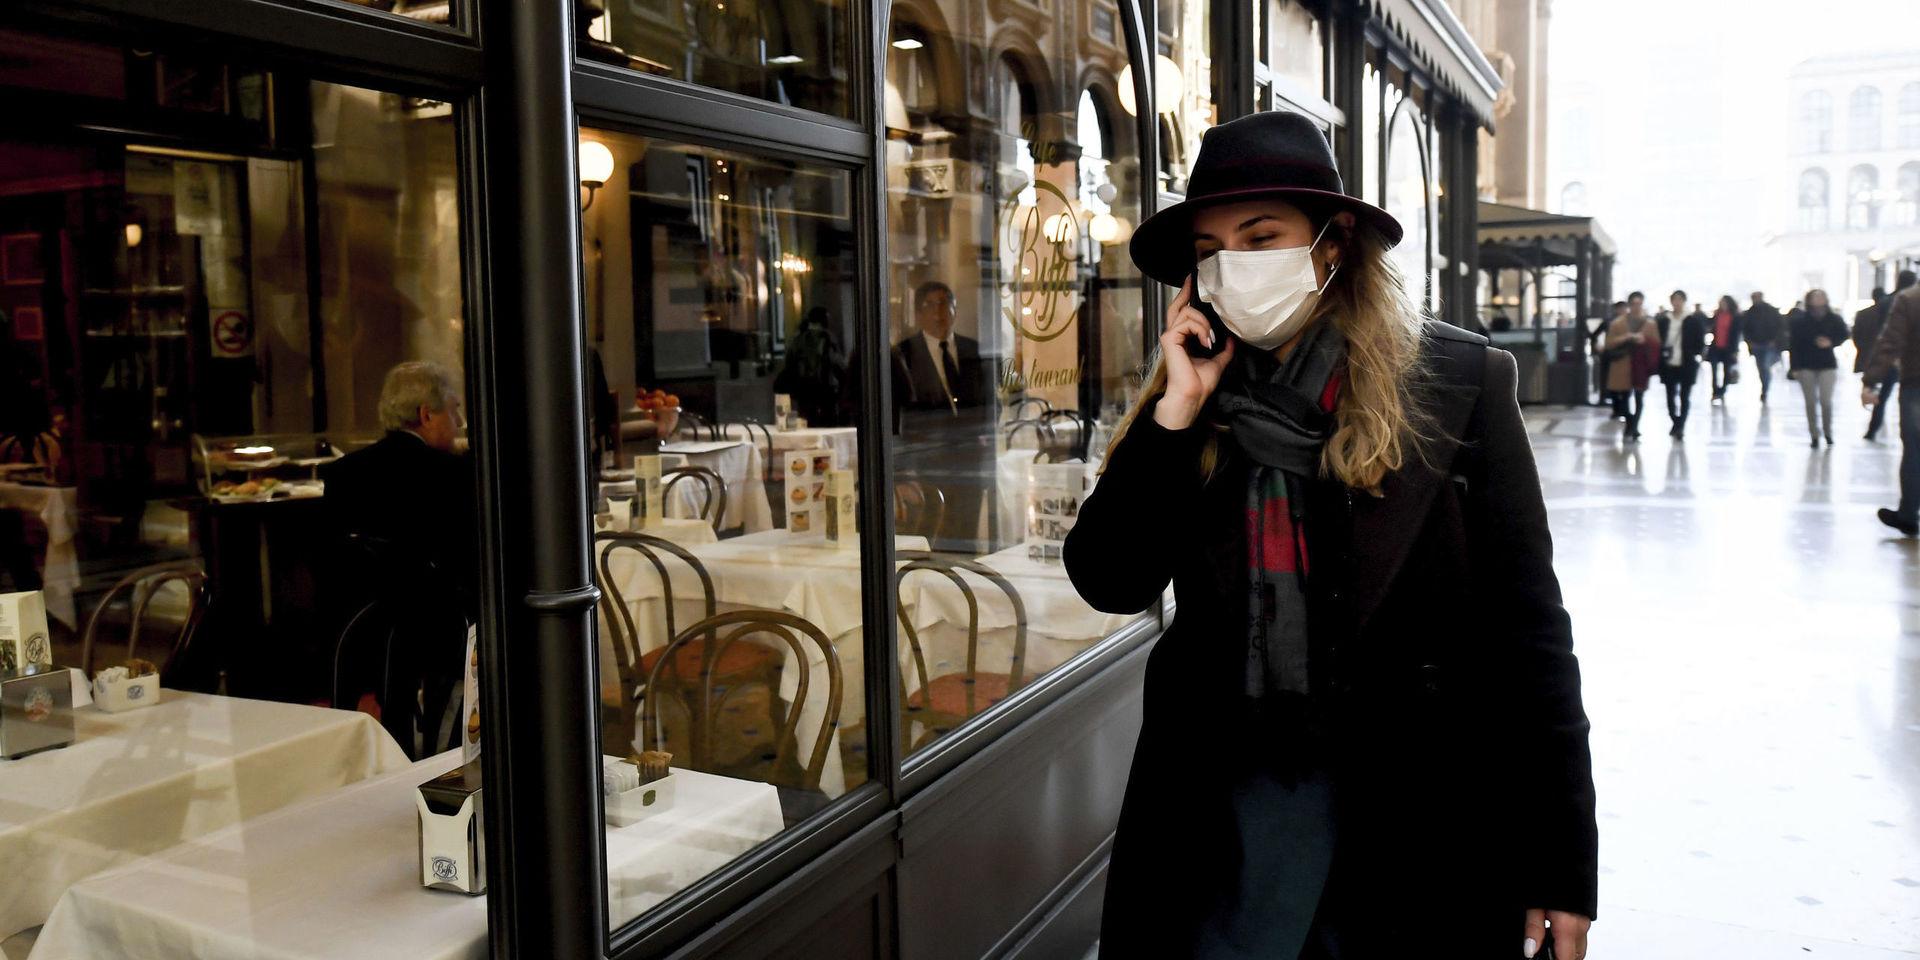 A woman wearing a sanitary mask talks on the phone in downtown Milan, Italy, Monday, Feb. 24, 2020. At least 190 people in Italy’s north have tested positive for the COVID-19 virus and four people have died, including an 84-year-old man who died overnight in Bergamo, the Lombardy regional government reported. (Claudio Furlan/Lapresse via AP)  MIL806